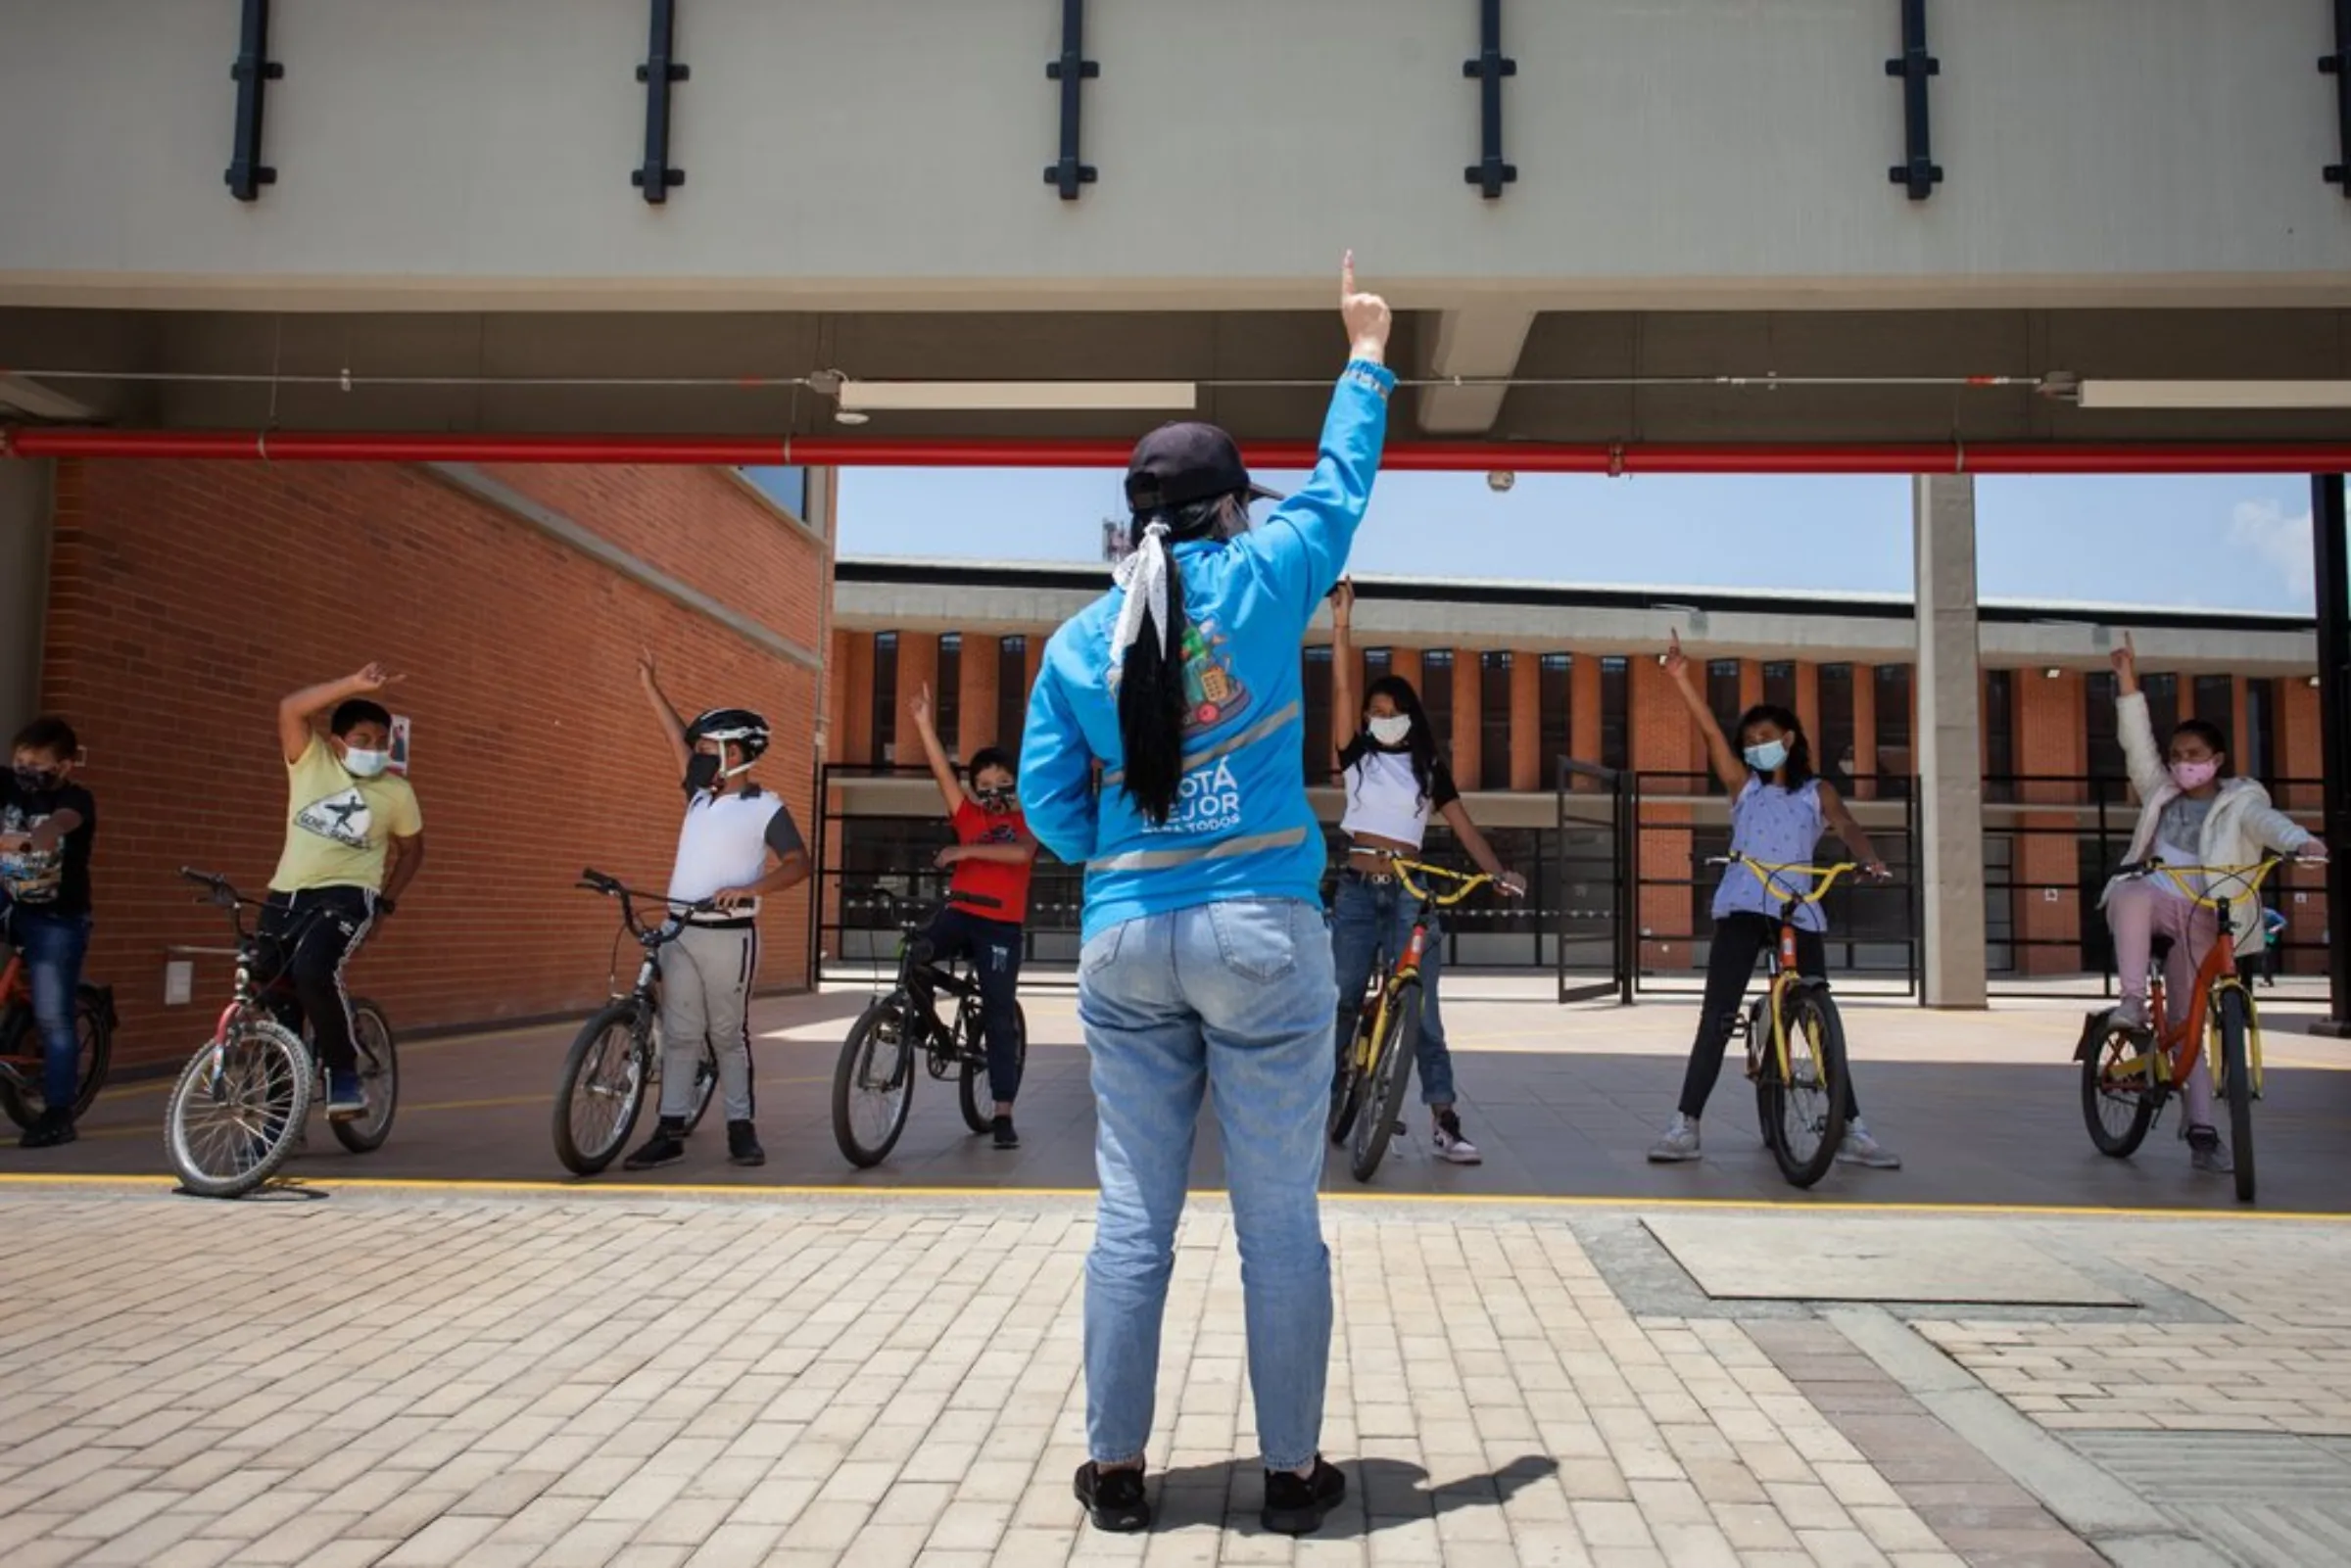 An instructor engages with new cyclists at “The Bike College”, a new public school in the poor neighbourhood of Bosa, in Bogota, Colombia, April 22, 2021